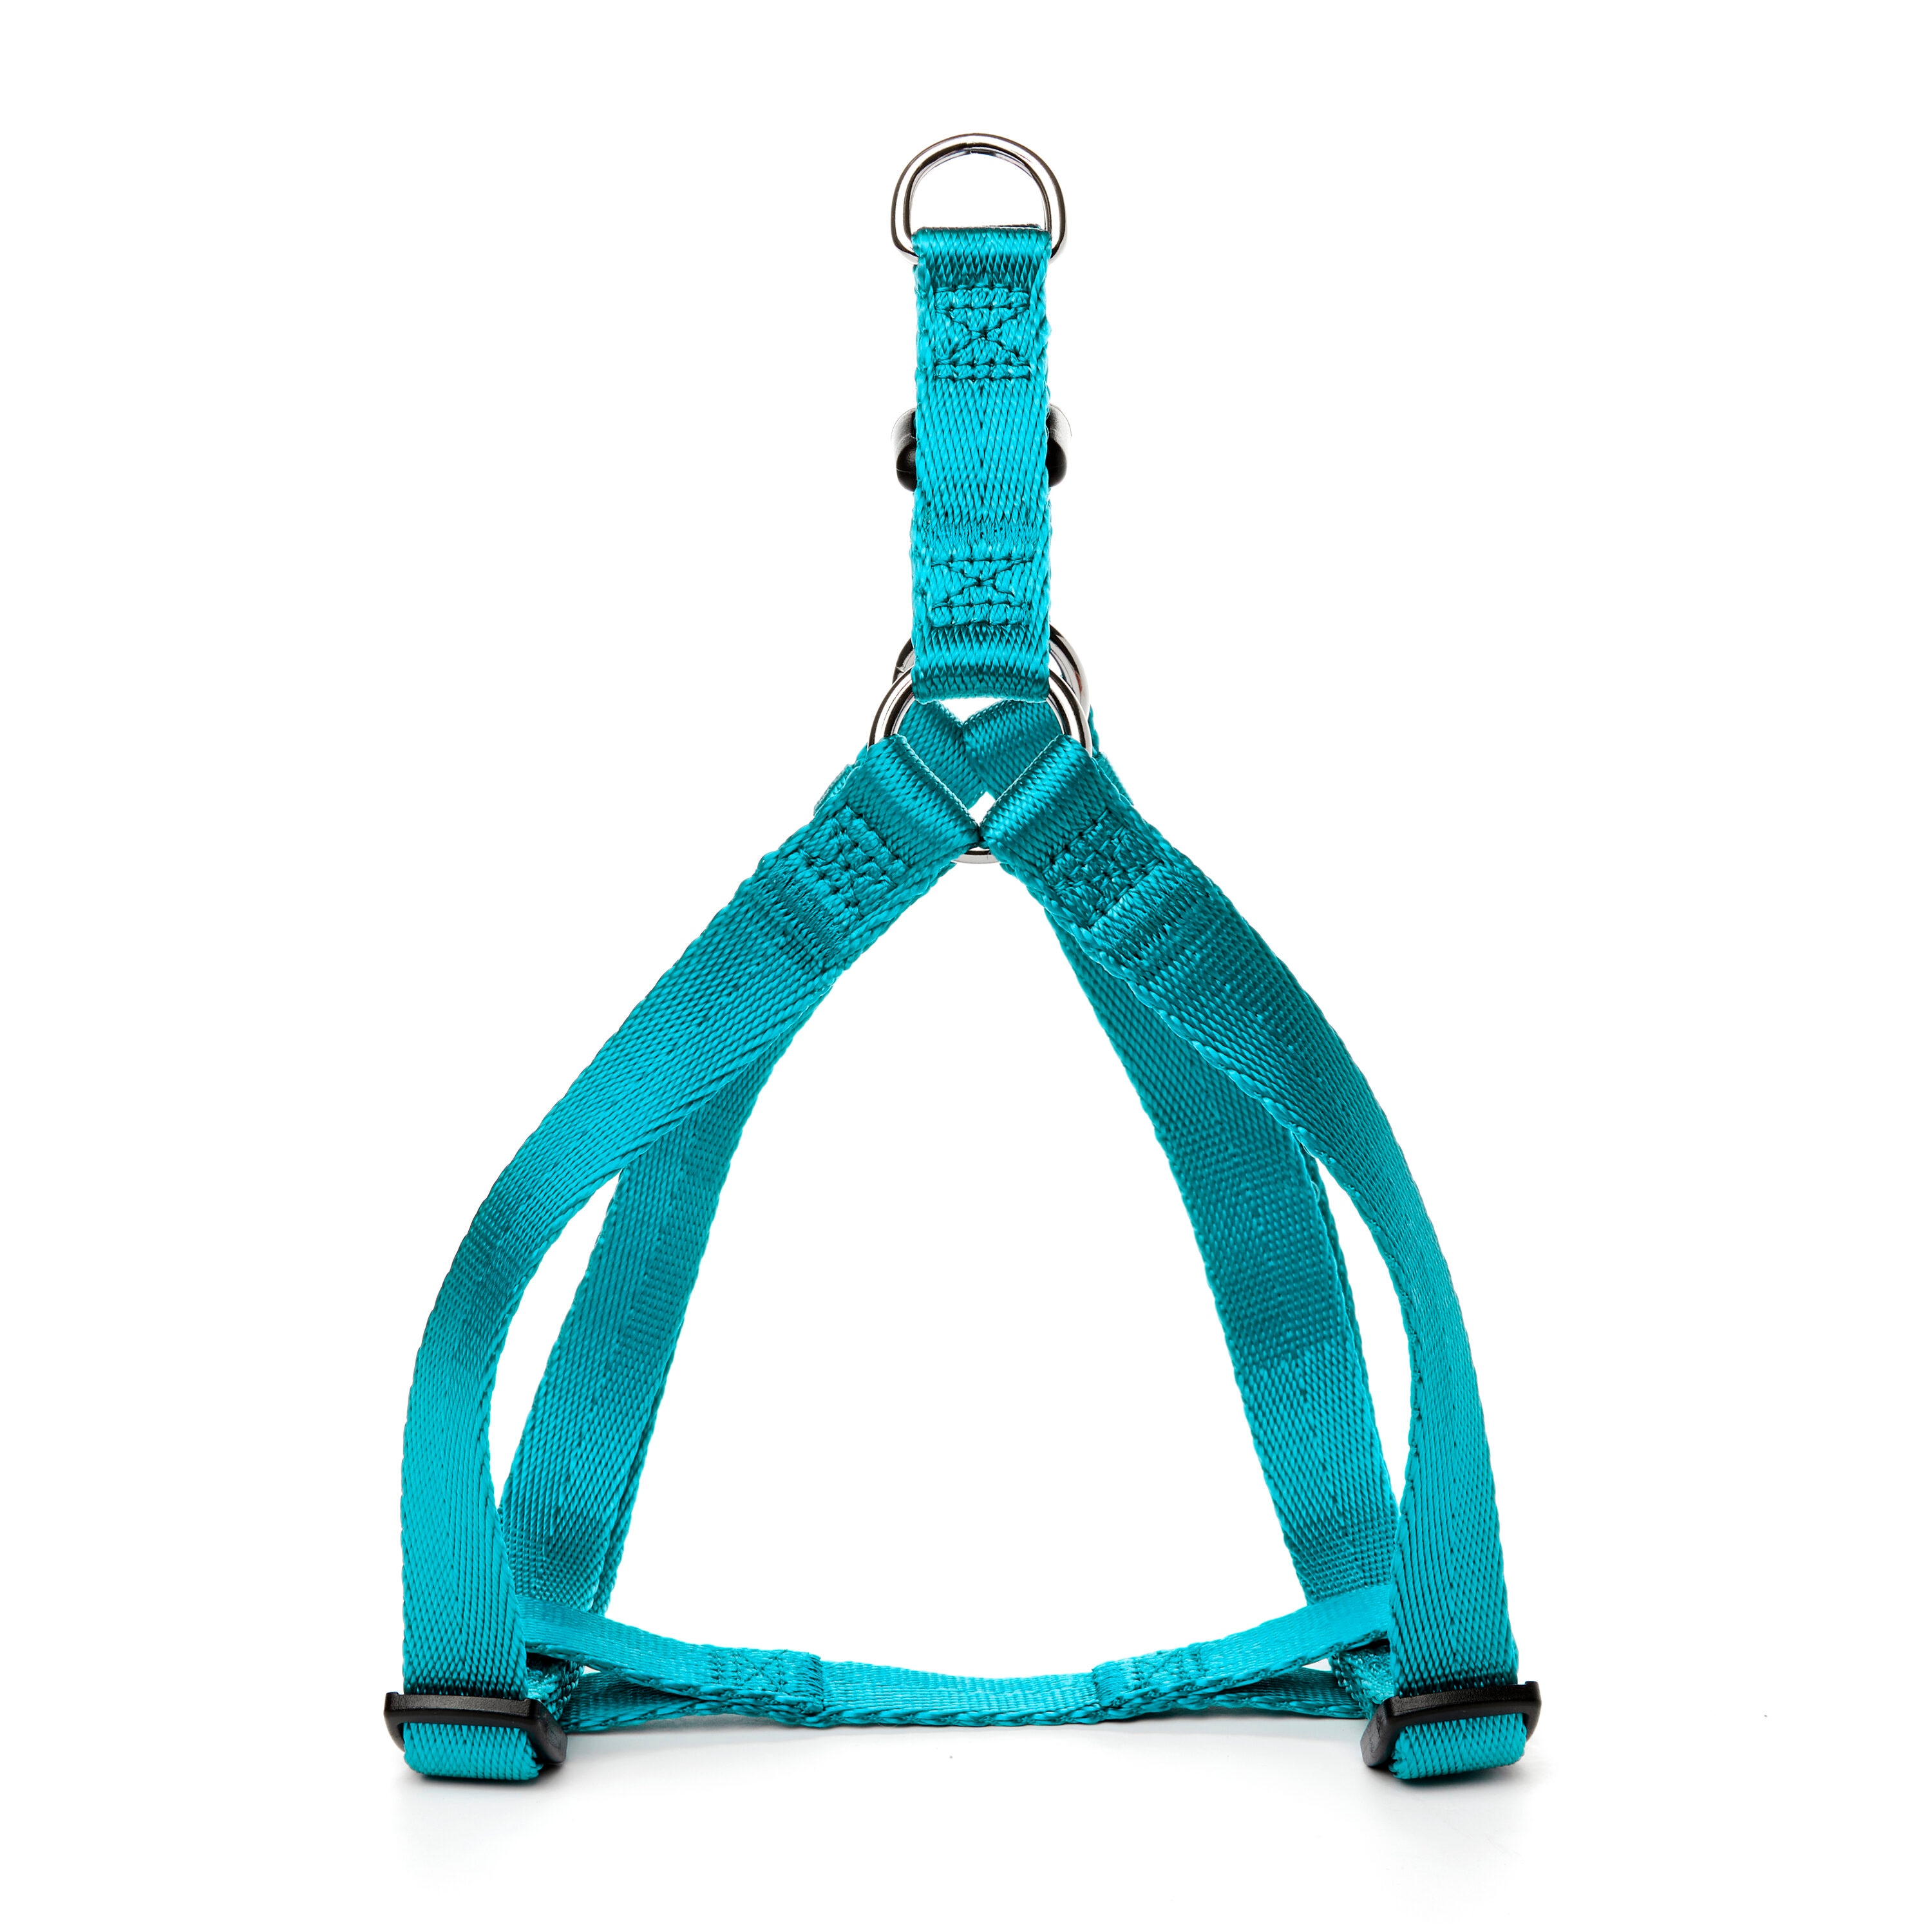 LUXURY DOG HARNESS COLLECTION – HauteHounds